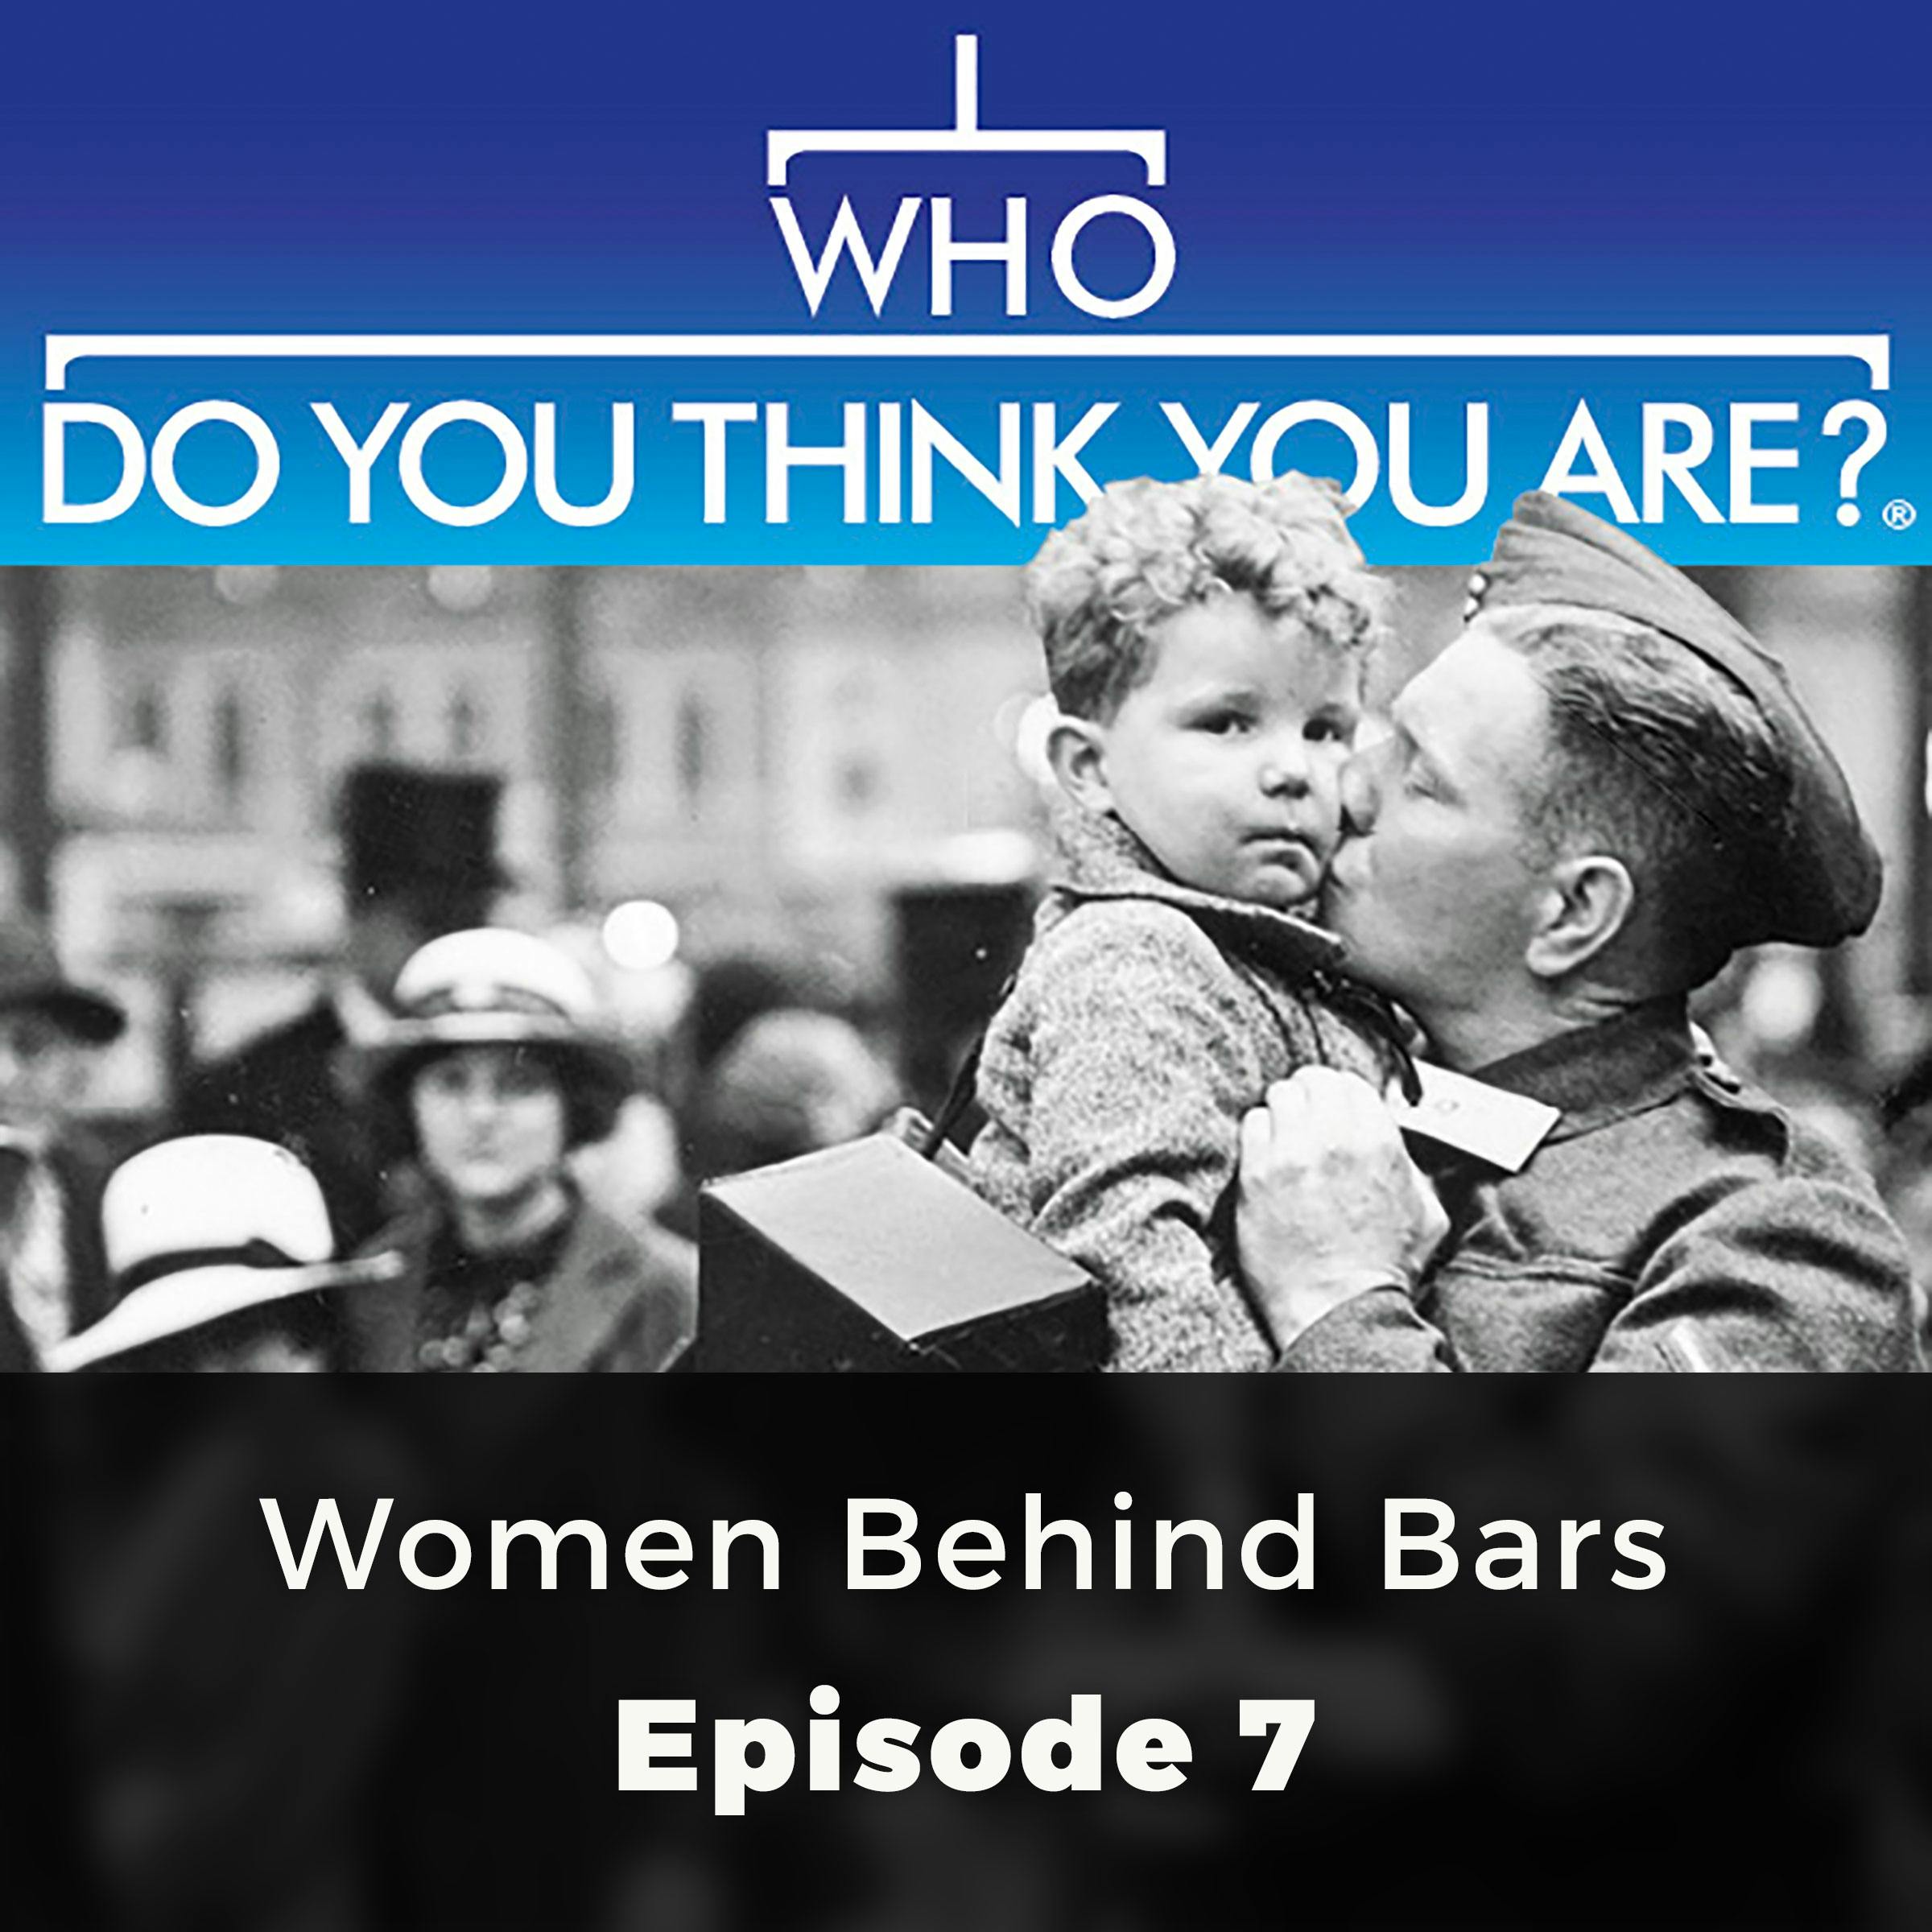 Who Do You Think You Are? Women Behind Bars: Episode 7 - Angela Buckley